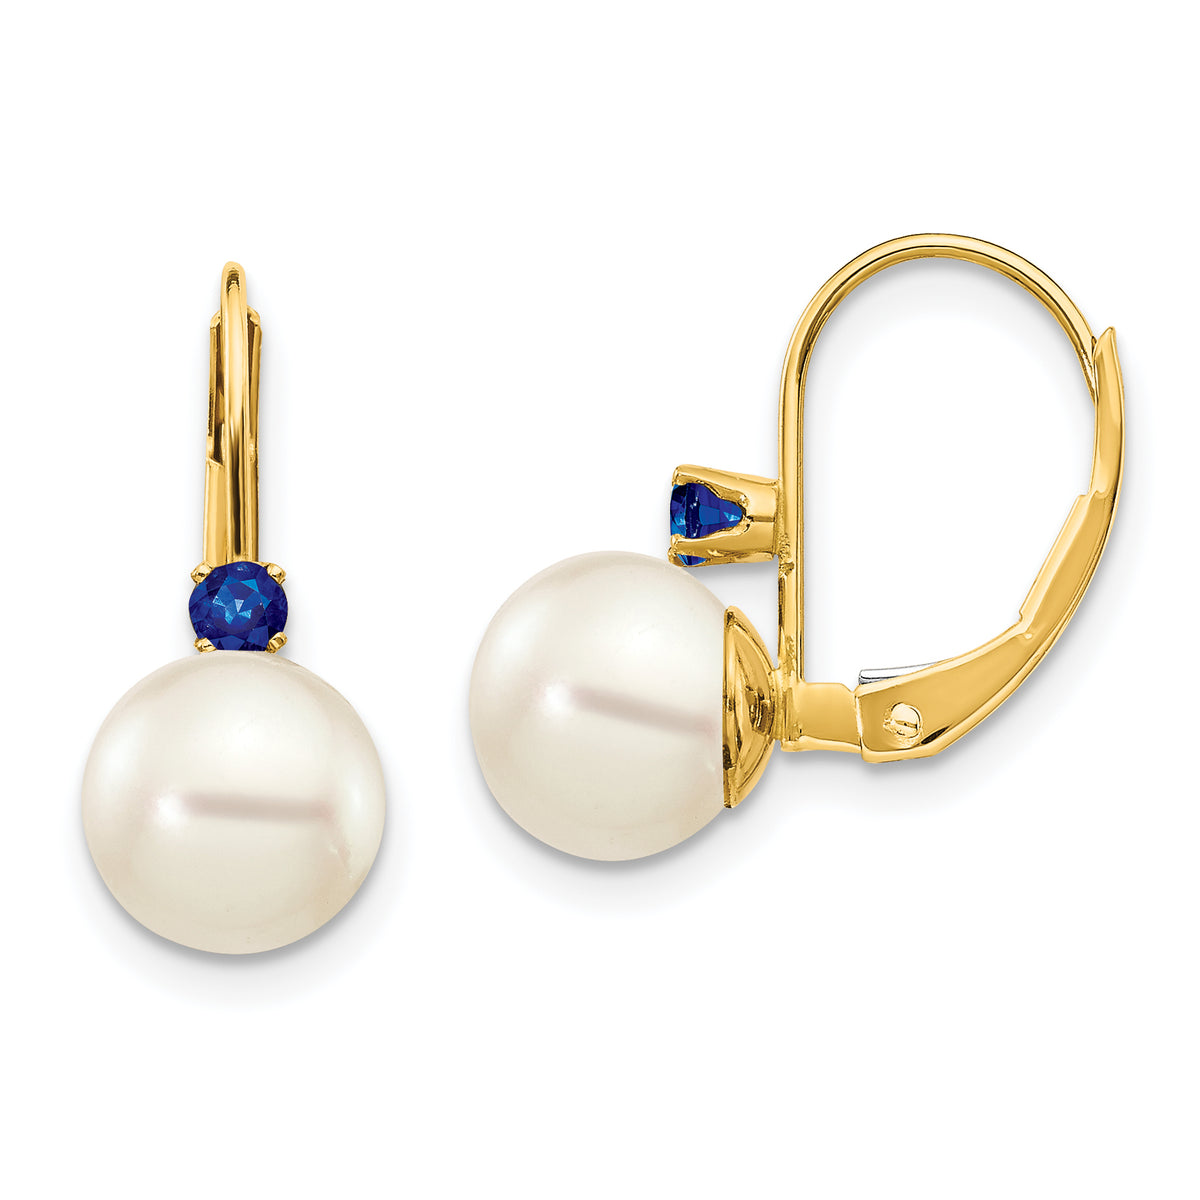 14k 7-7.5mm White Round FW Cultured Pearl Sapphire Leverback Earrings